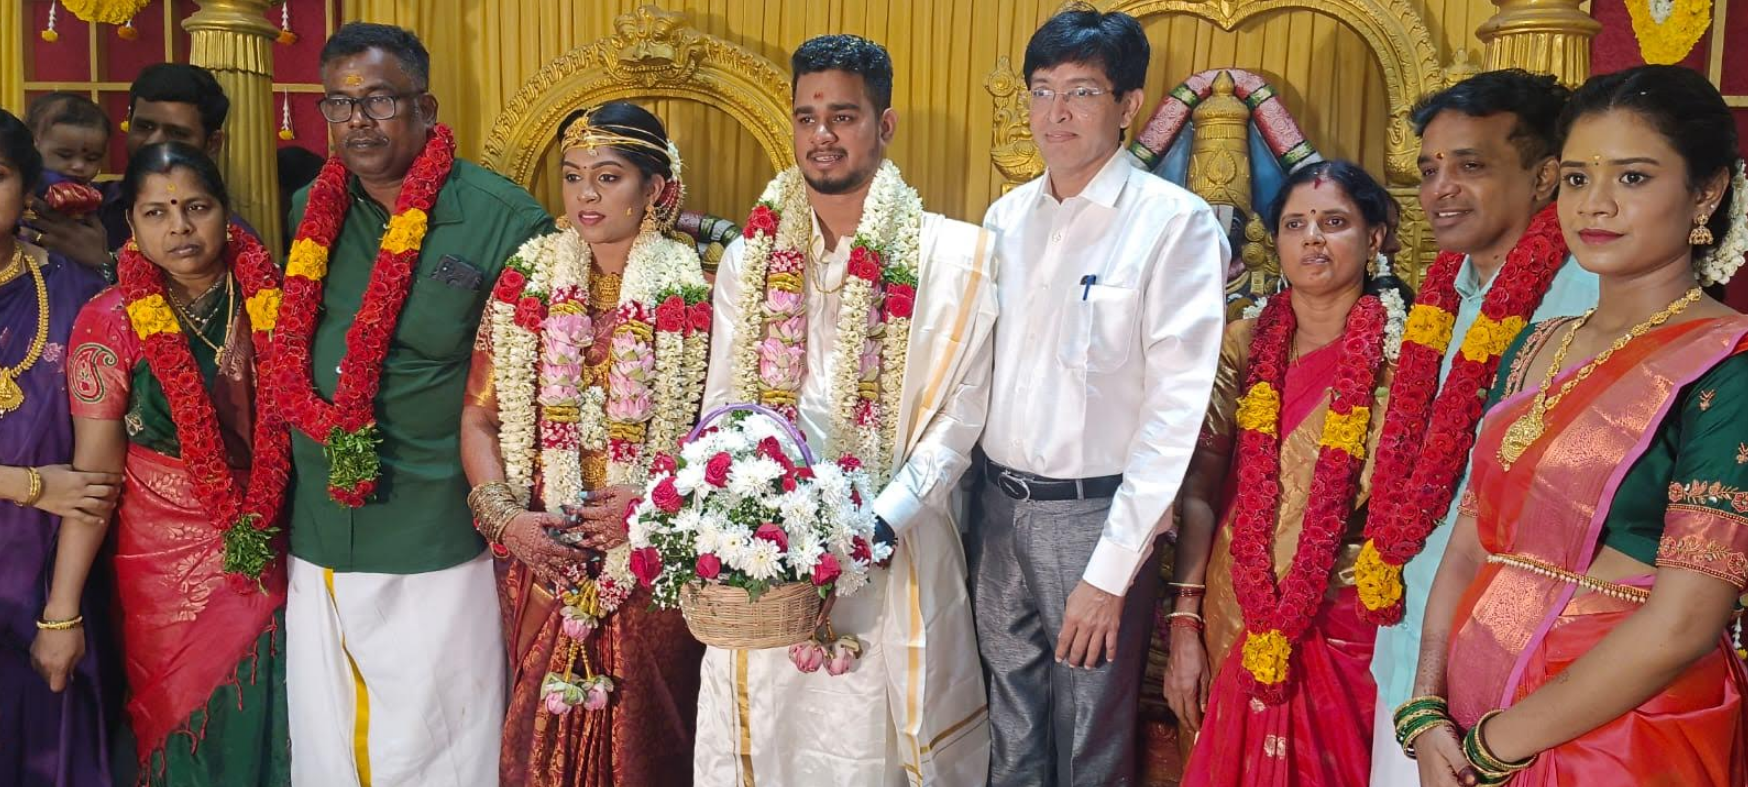 Nexus PR CEO Indiran Pandian Son Rajapandian wedding ceremony  attended and Blessed by Chennai Corporation Commissioner Dr. J. Radhakrishnan, IAS.